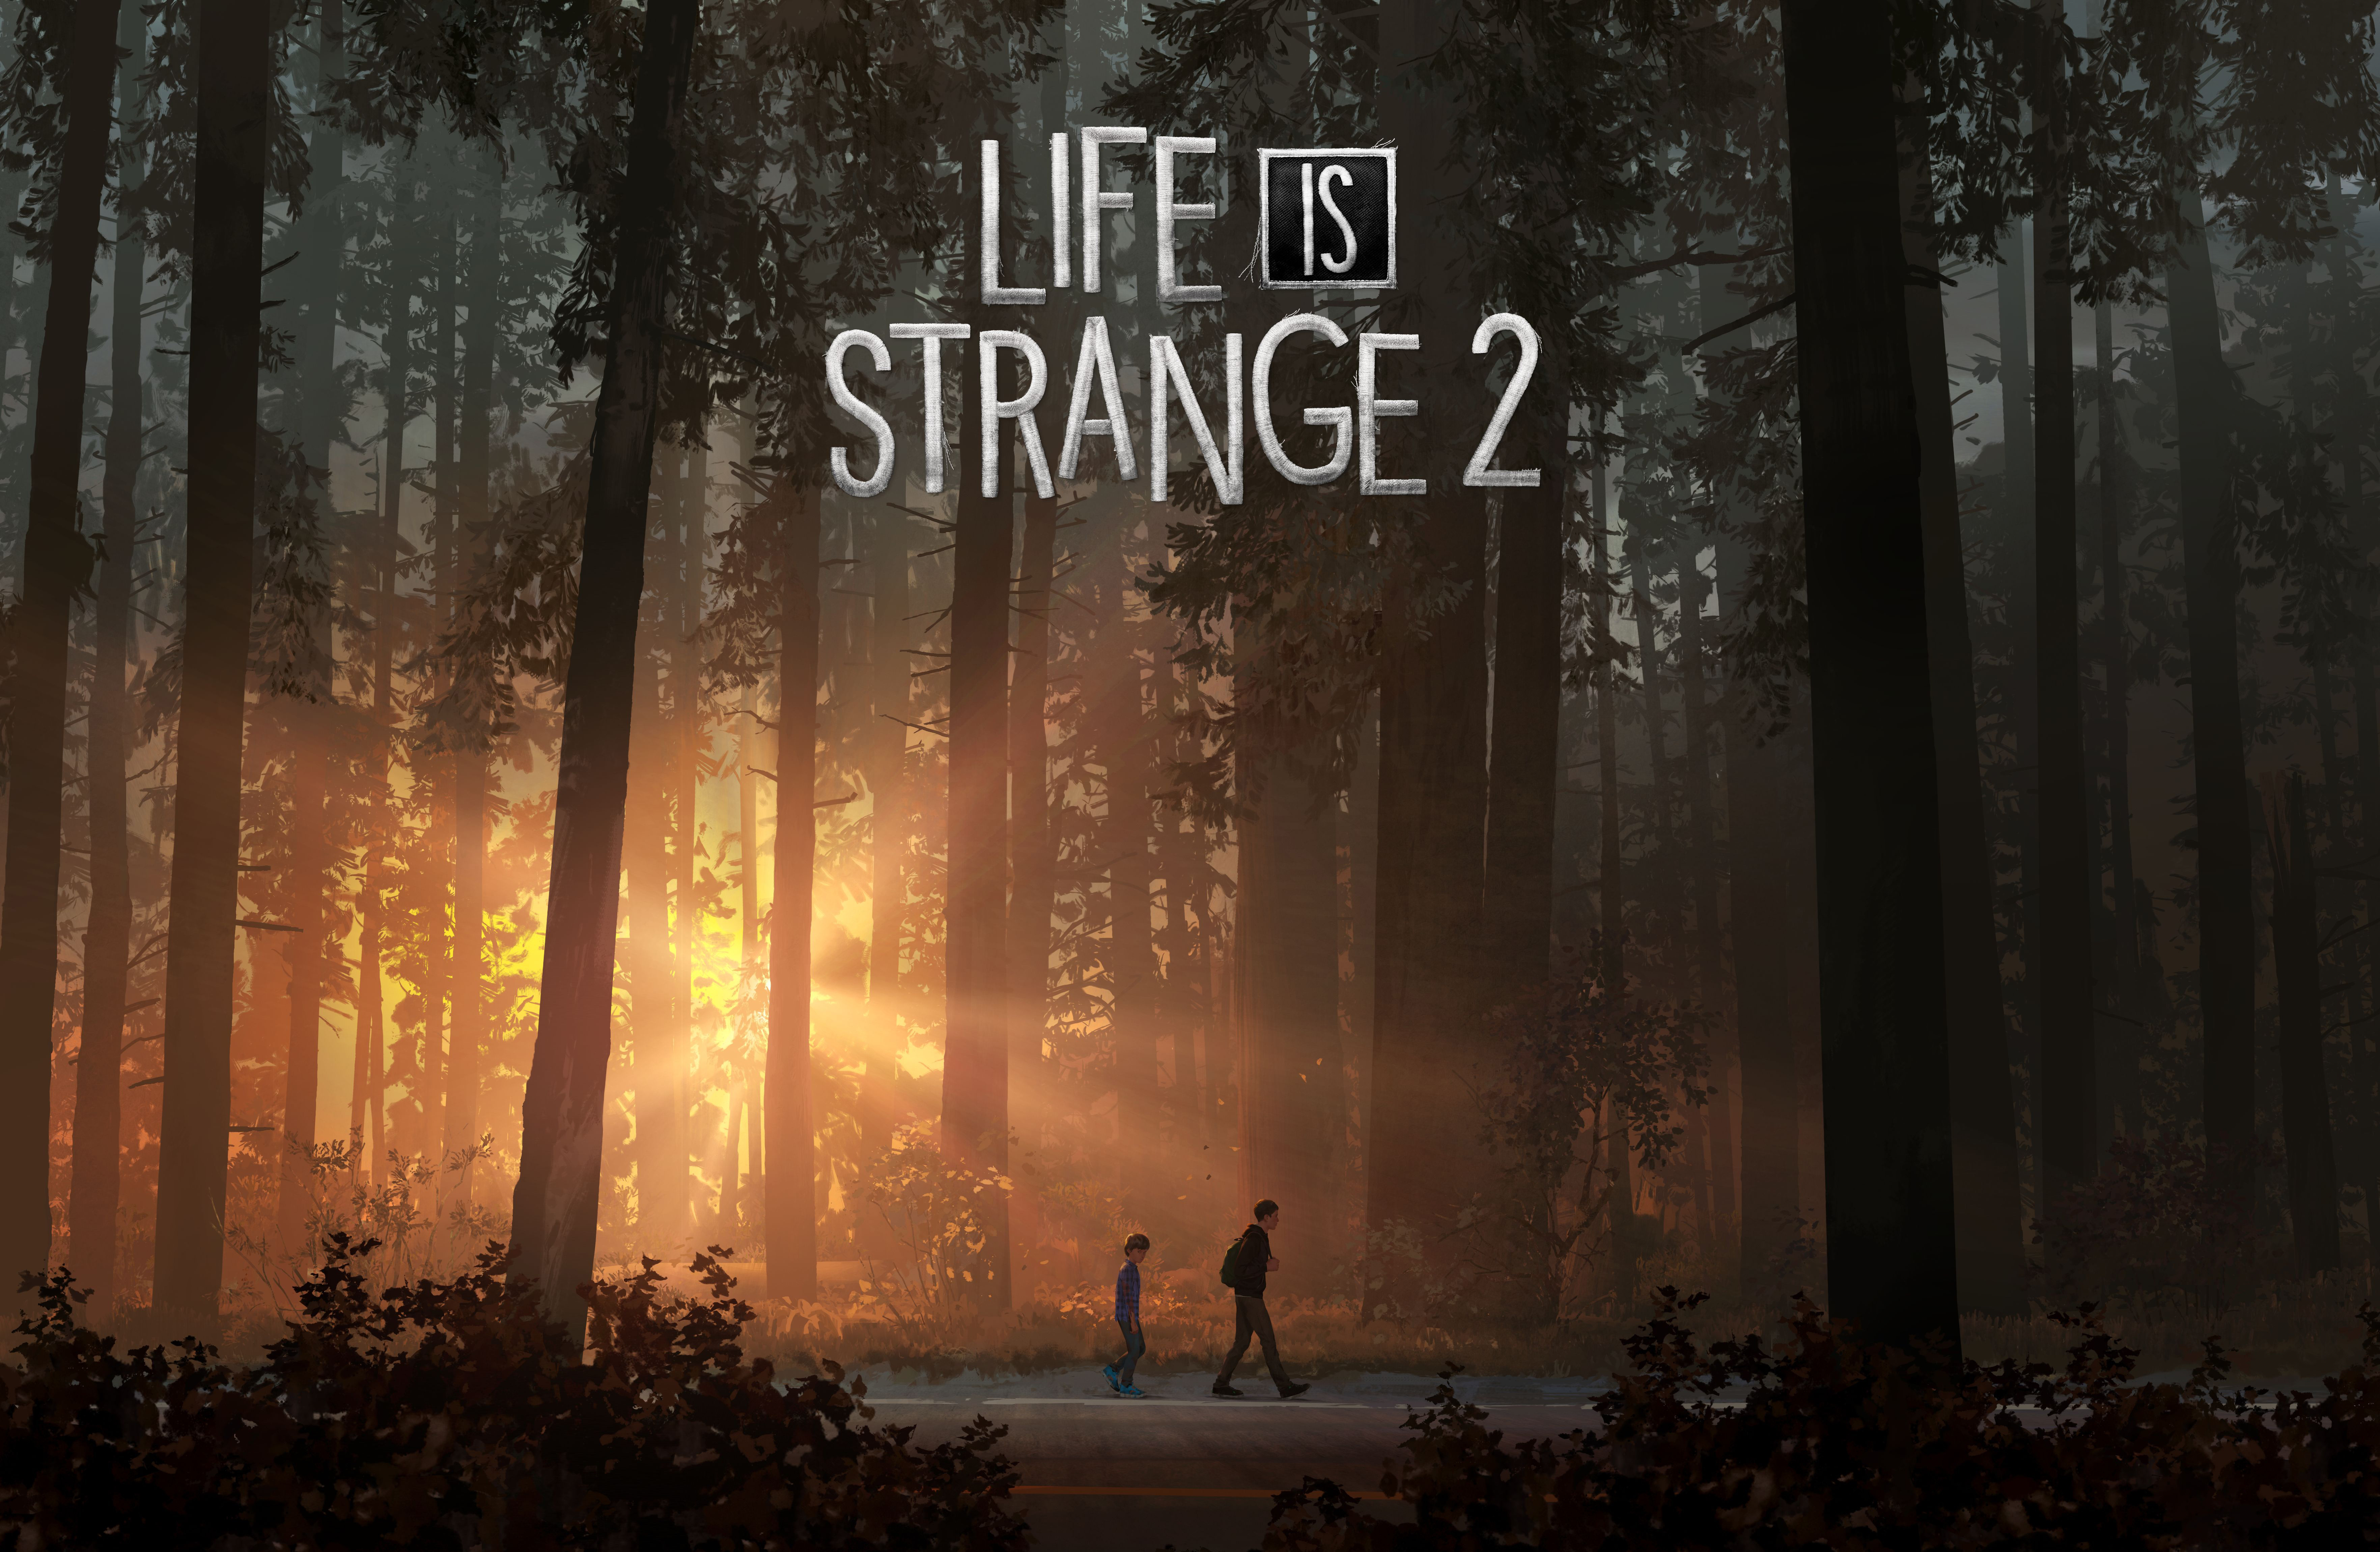 N life being. Шон Диас Life is Strange 2. Life is Strange 2 лес. Life is Strange 2 1 эпизод. Into the Woods Life is Strange 2.